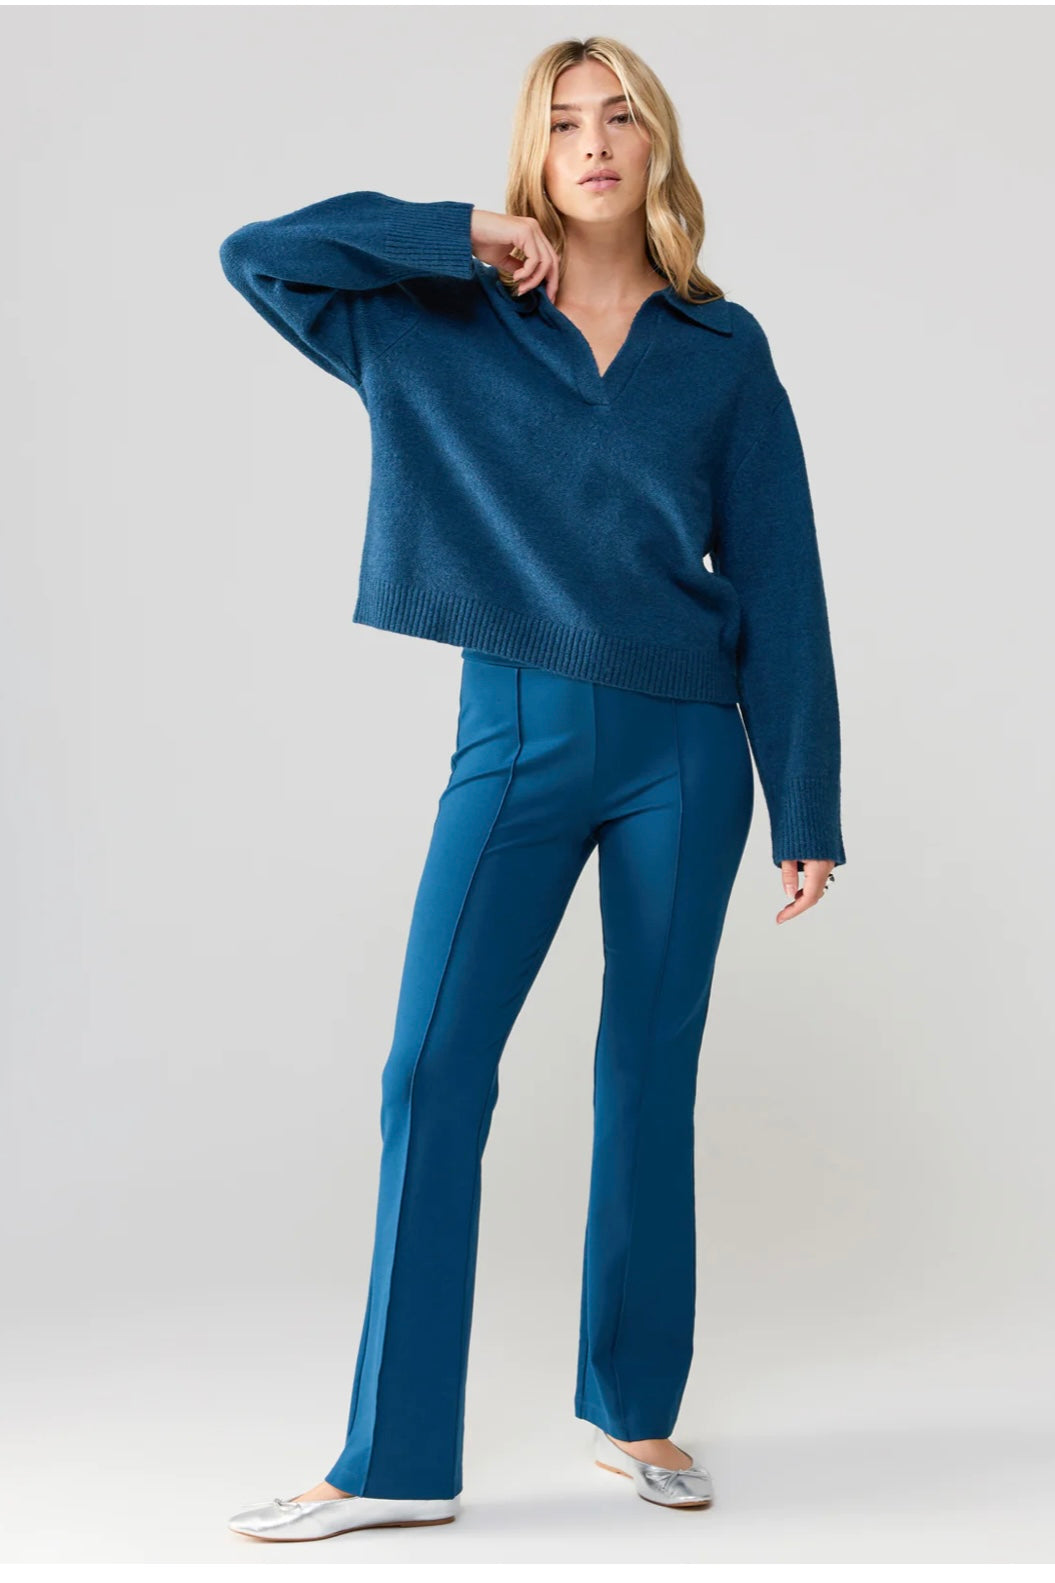 Johnny Collared Sweater in Blue Jewel